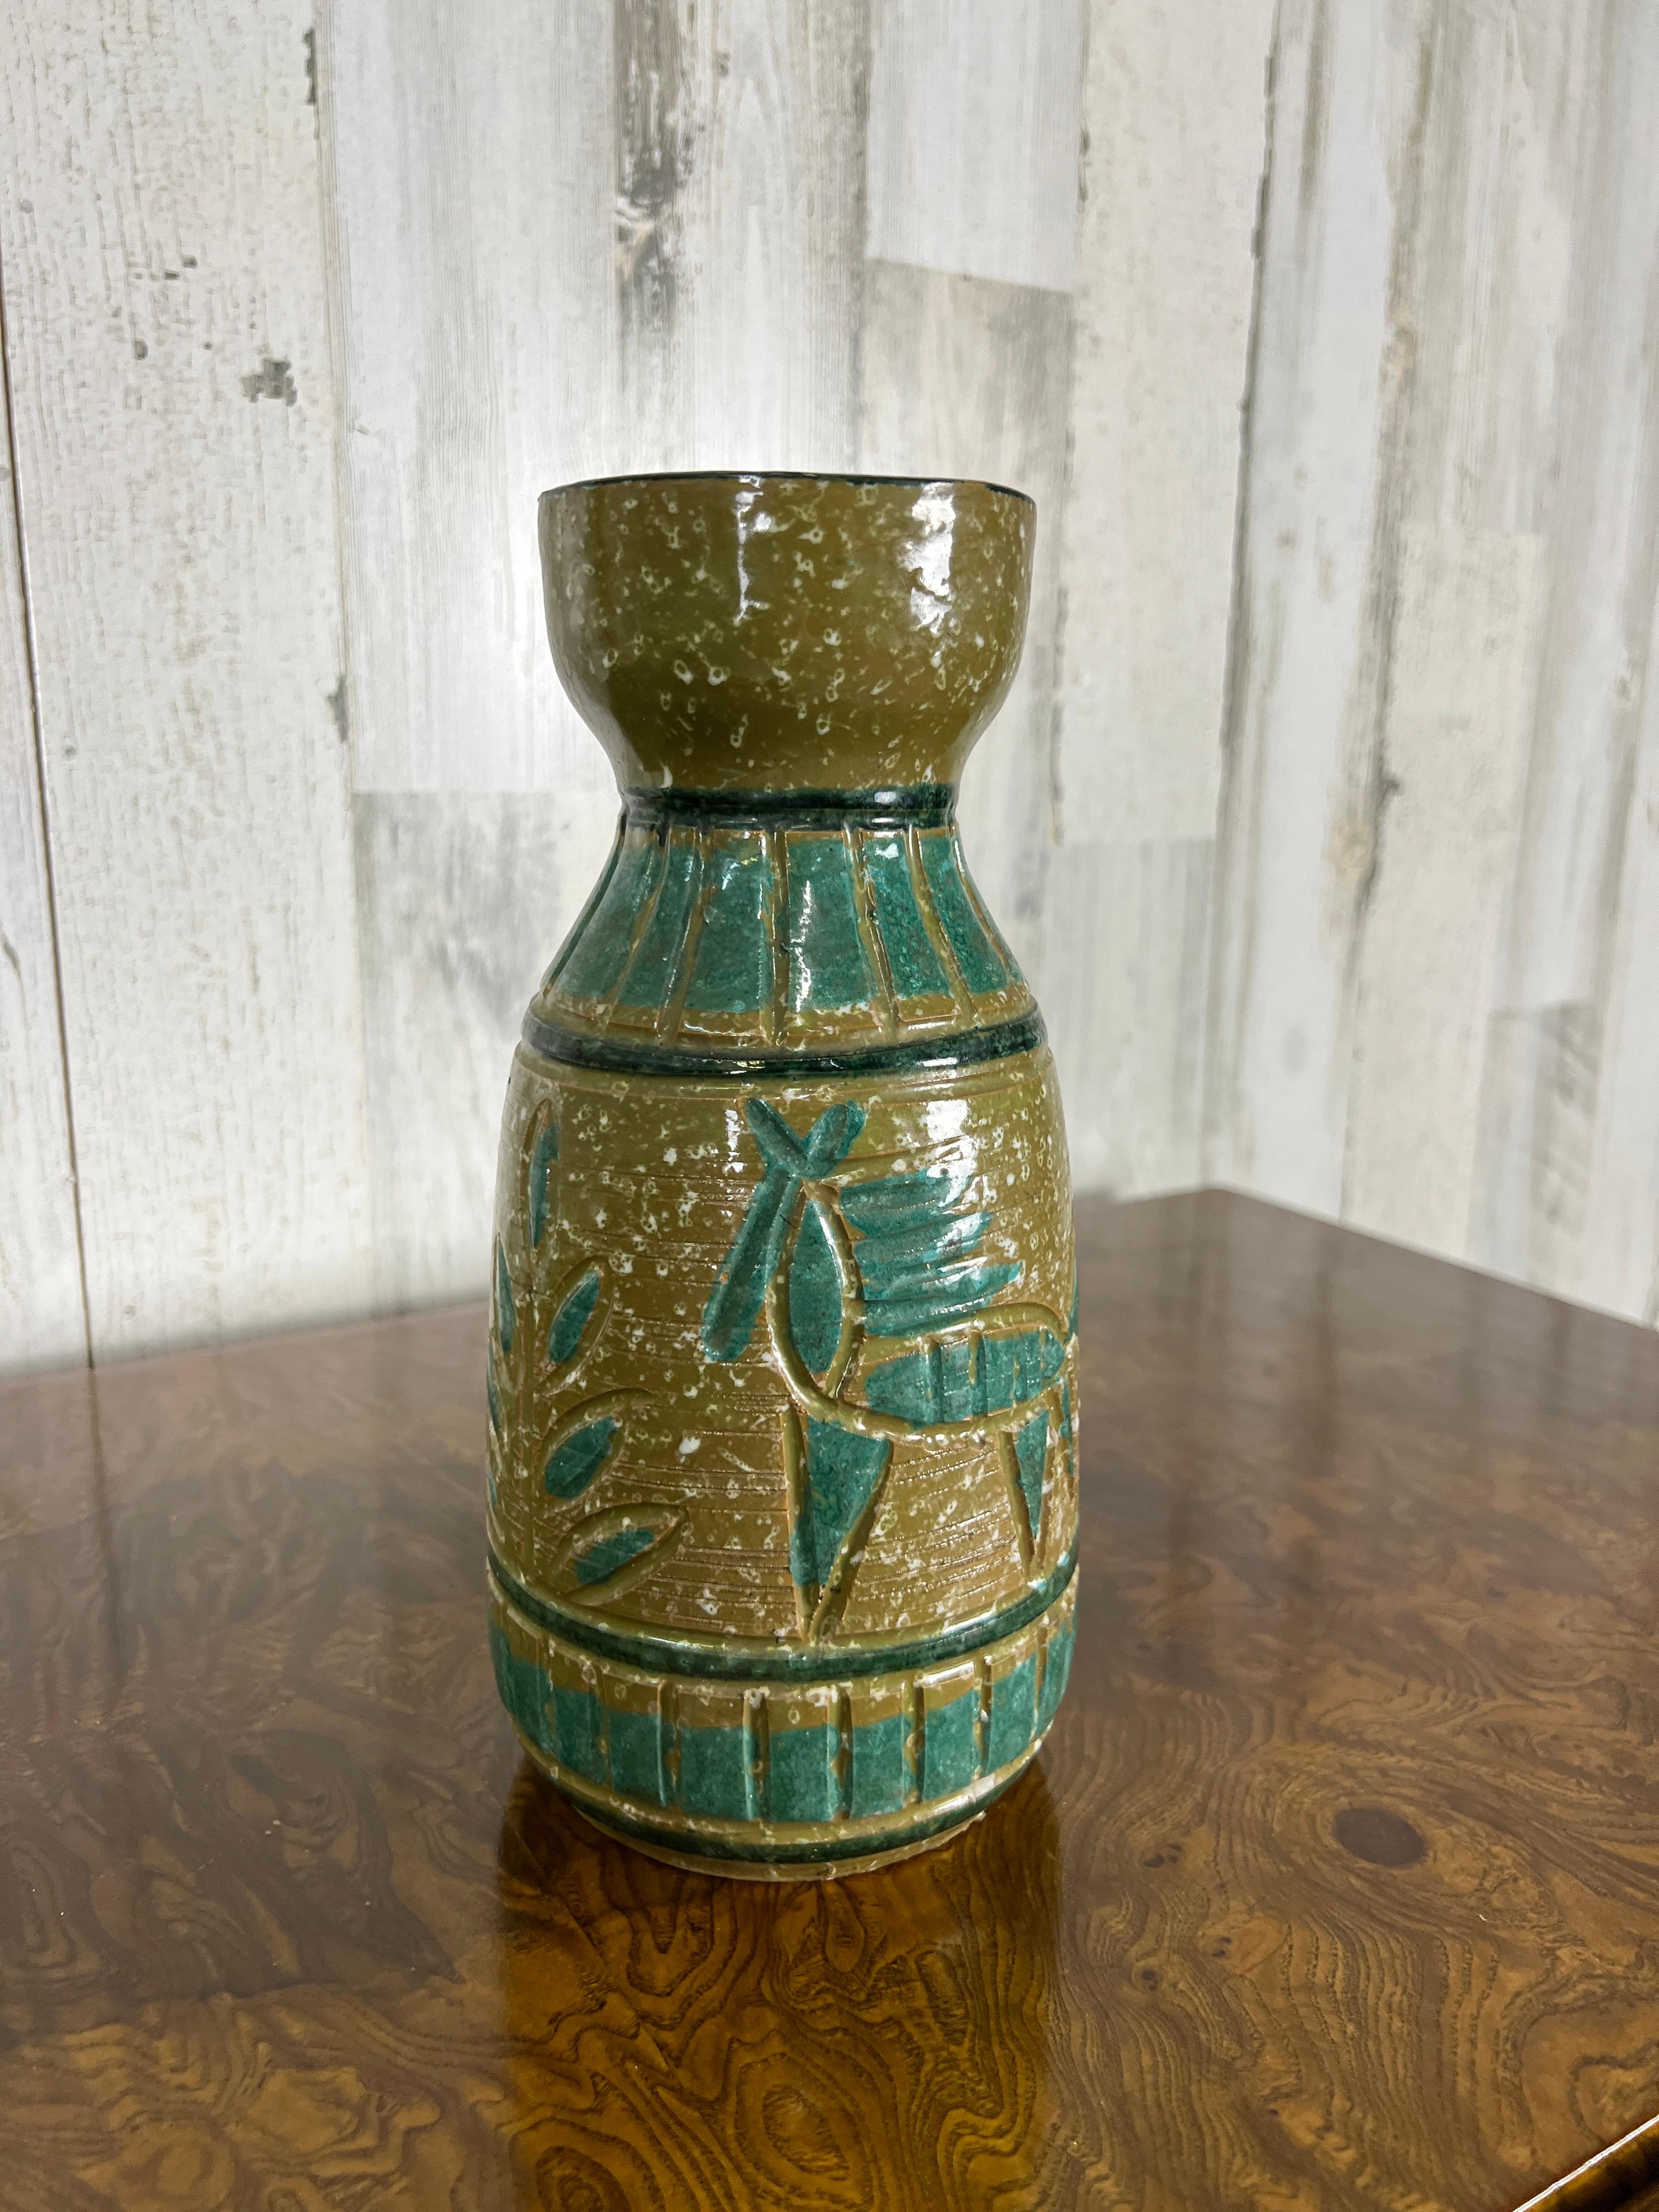 Italian Glazed Vase with Equine Design In Good Condition For Sale In Denton, TX